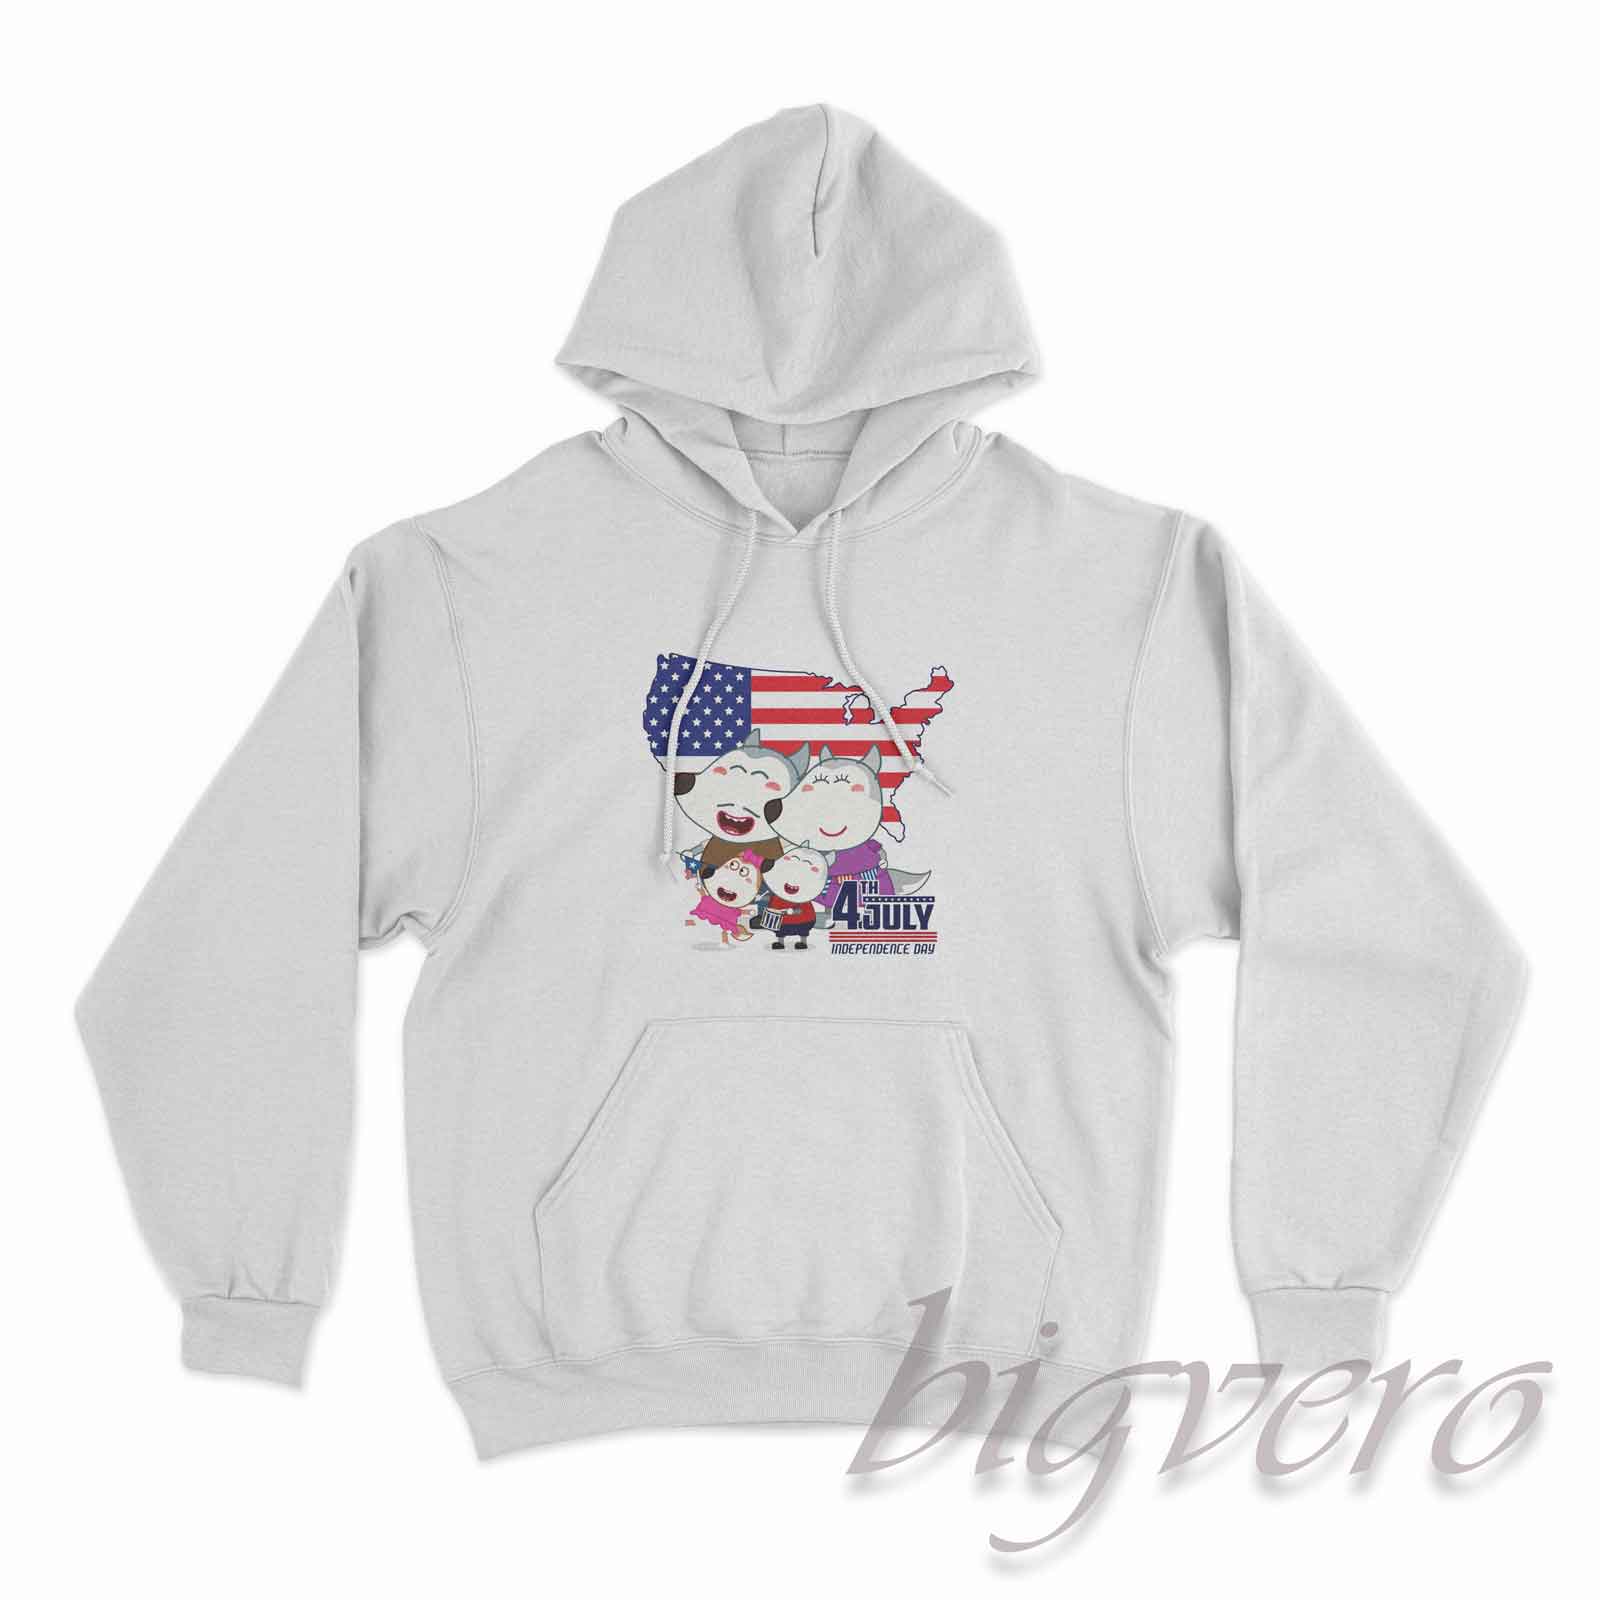 Buy Now Wolfoo Family Independence Day Hoodie - Big Vero